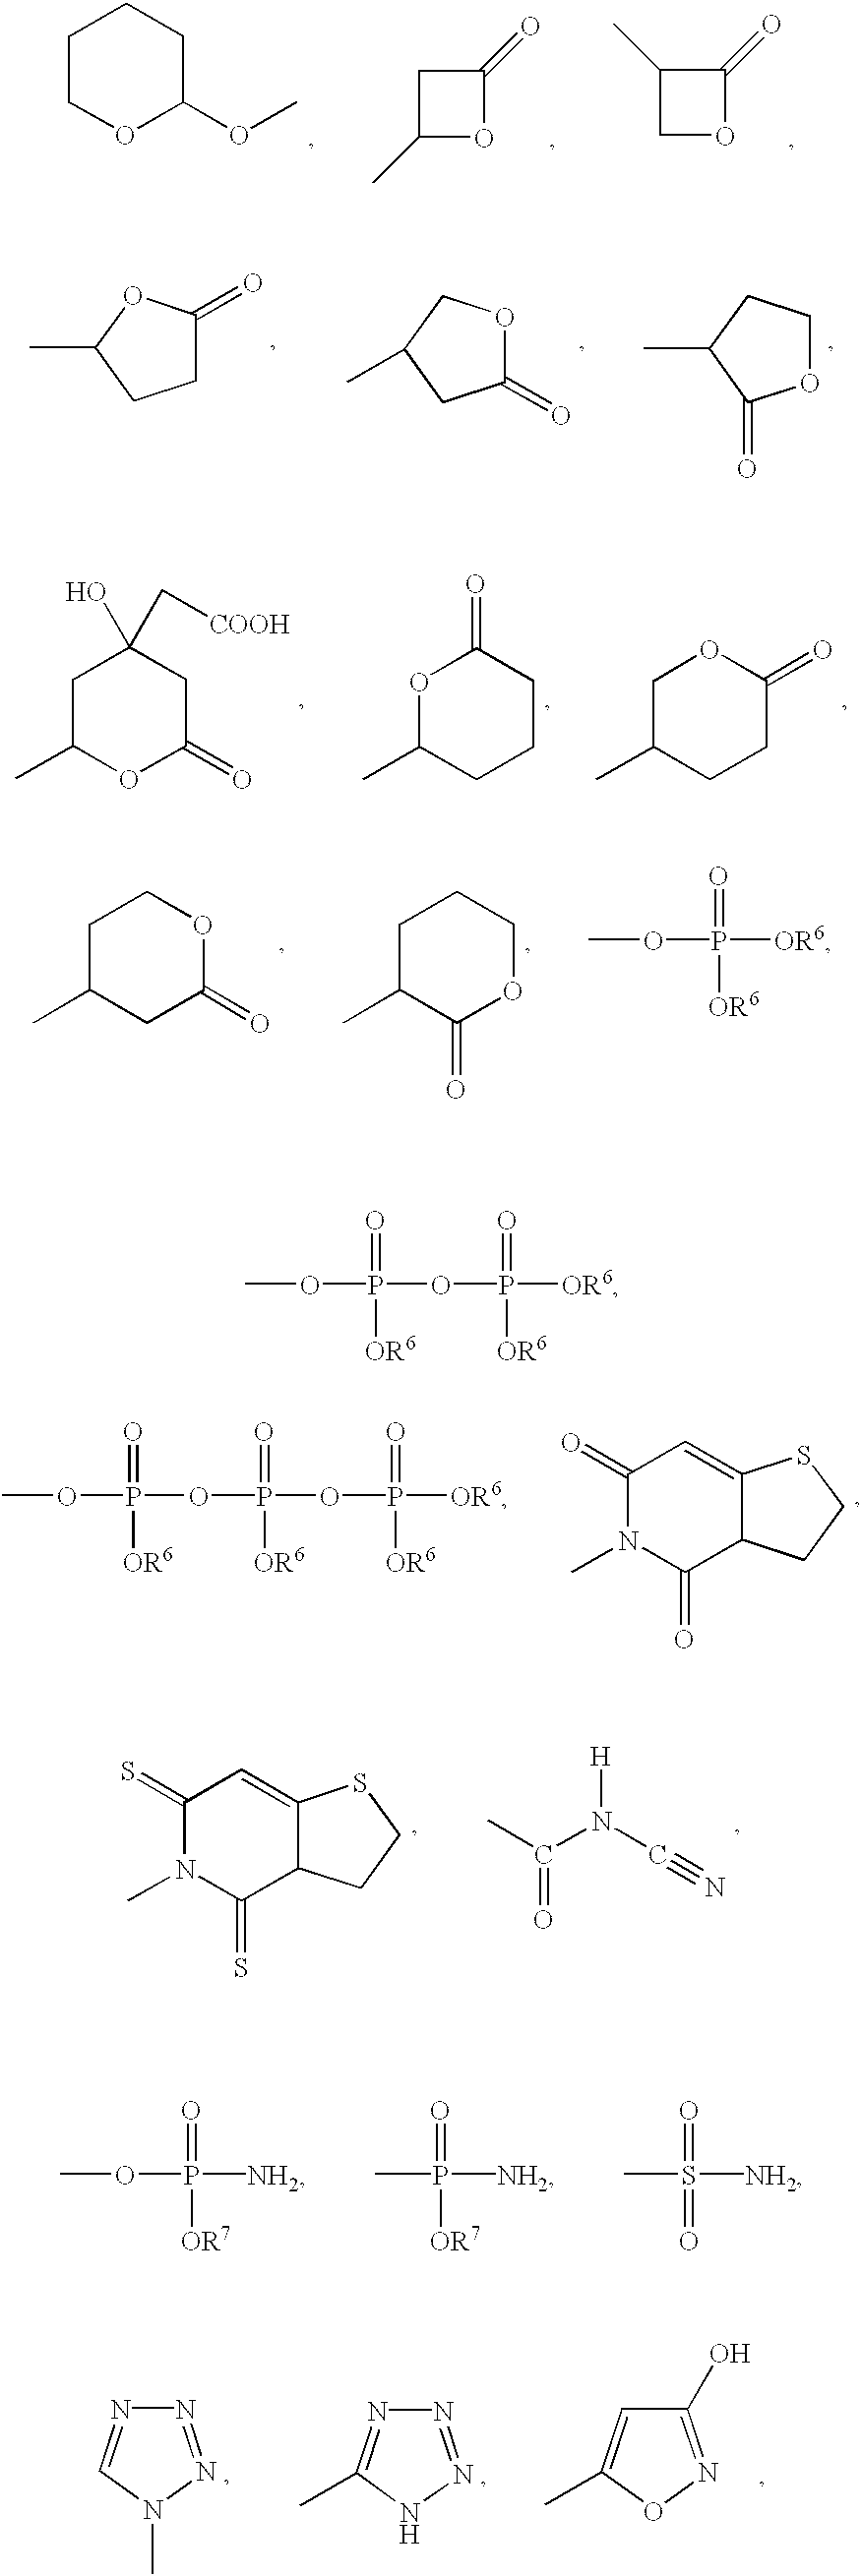 Methods for synthesizing ether compounds and intermediates therefor